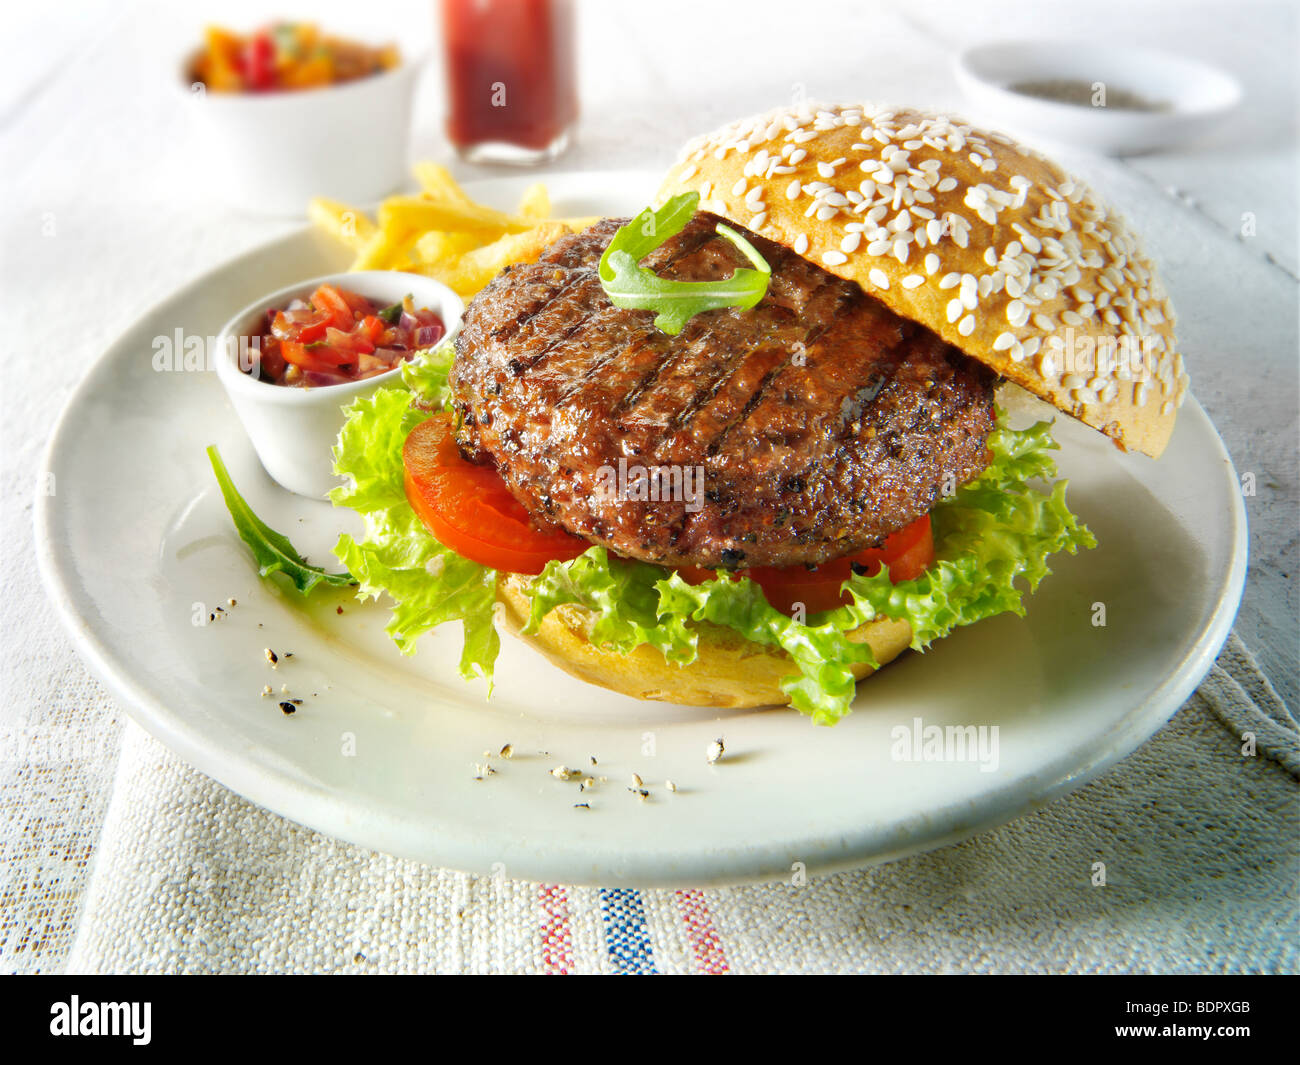 Char grilled beef burger with chips and salad and a seseme bun Stock Photo